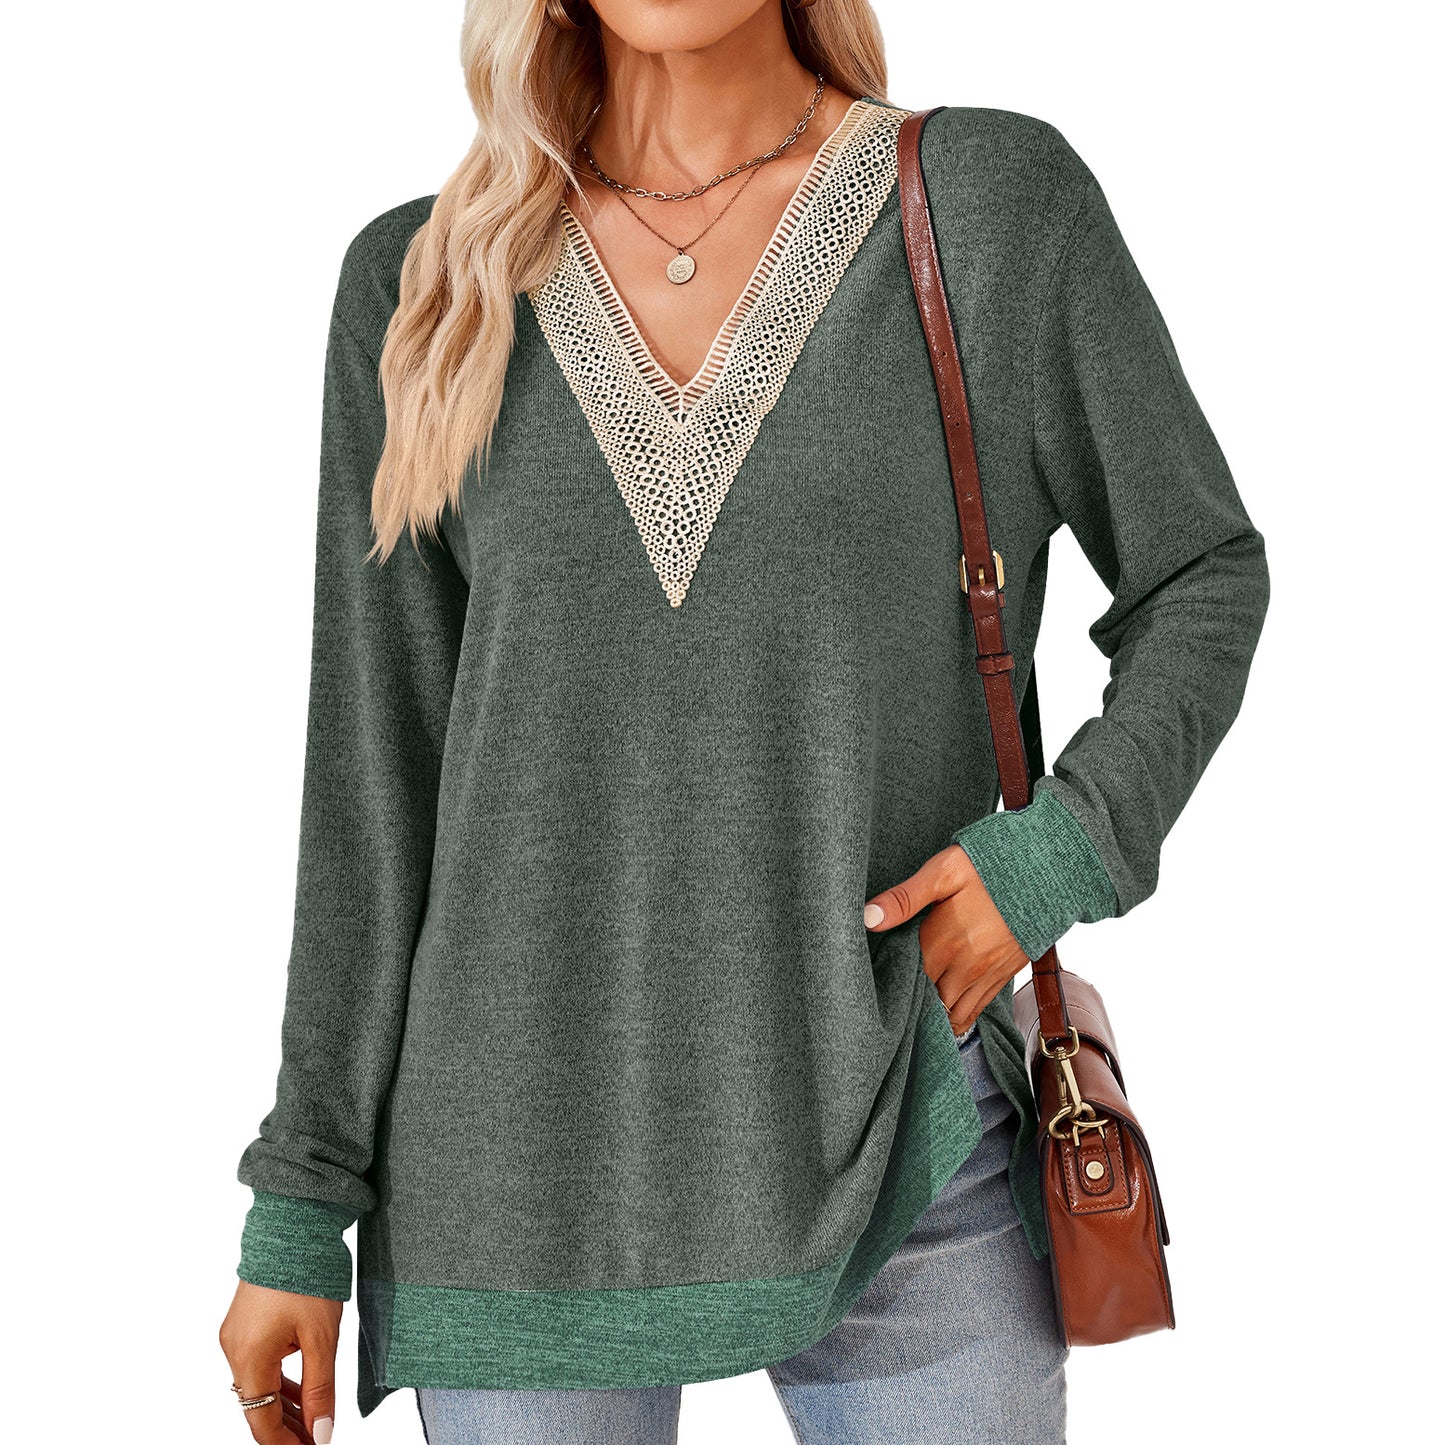 Women's Fashion V-neck Lace Solid Color Loose-fitting T-shirt Top